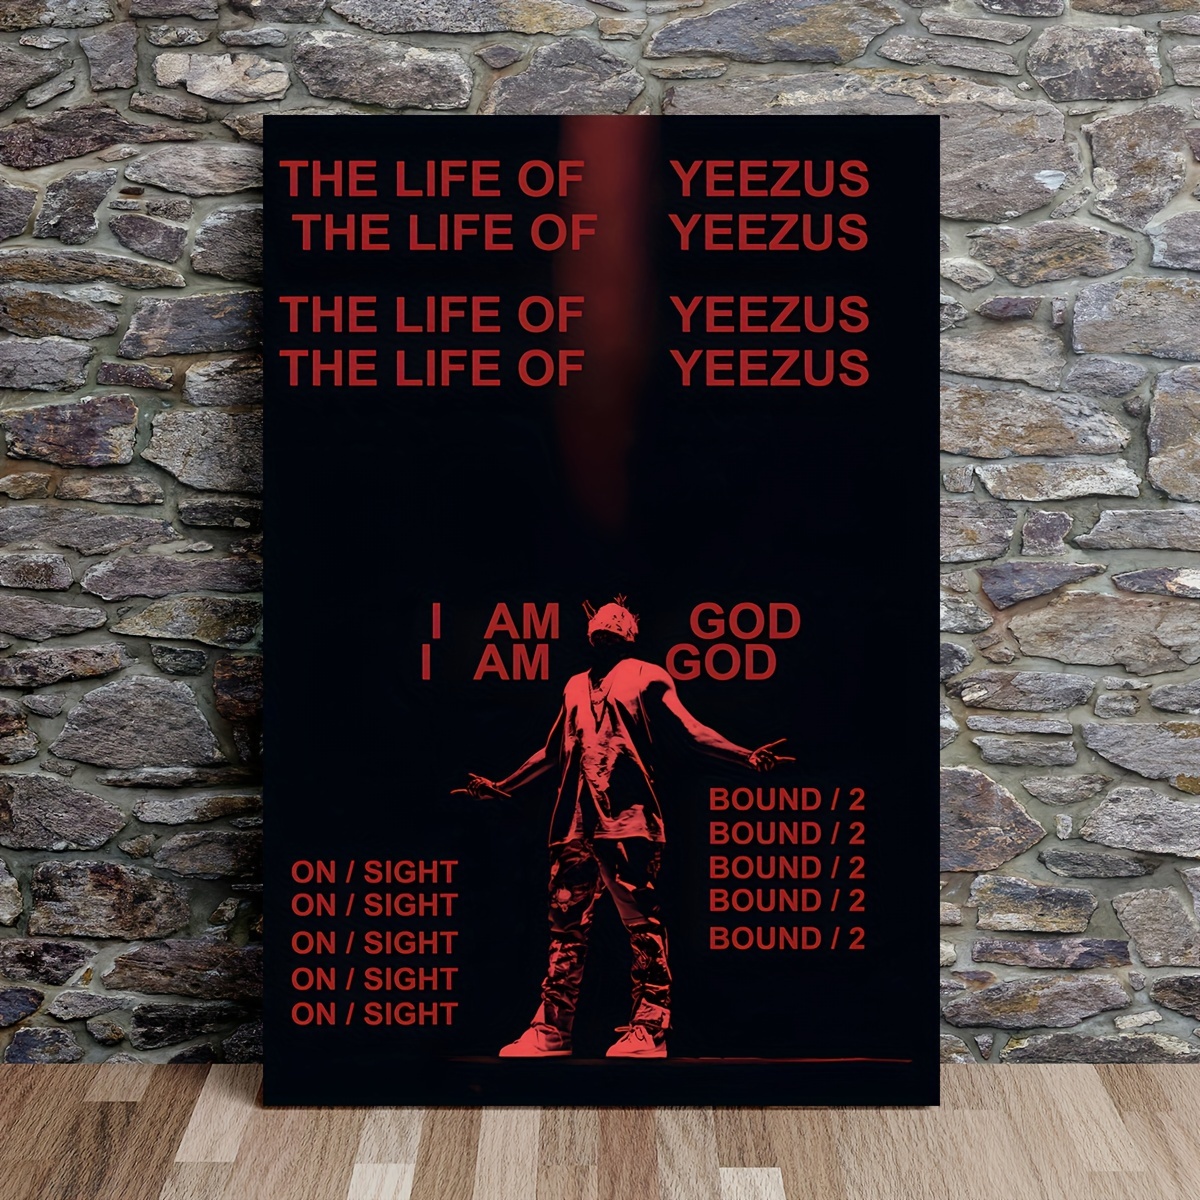 Kanye West Poster, Album Cover Wall Art, Christmas and Birthday Gift